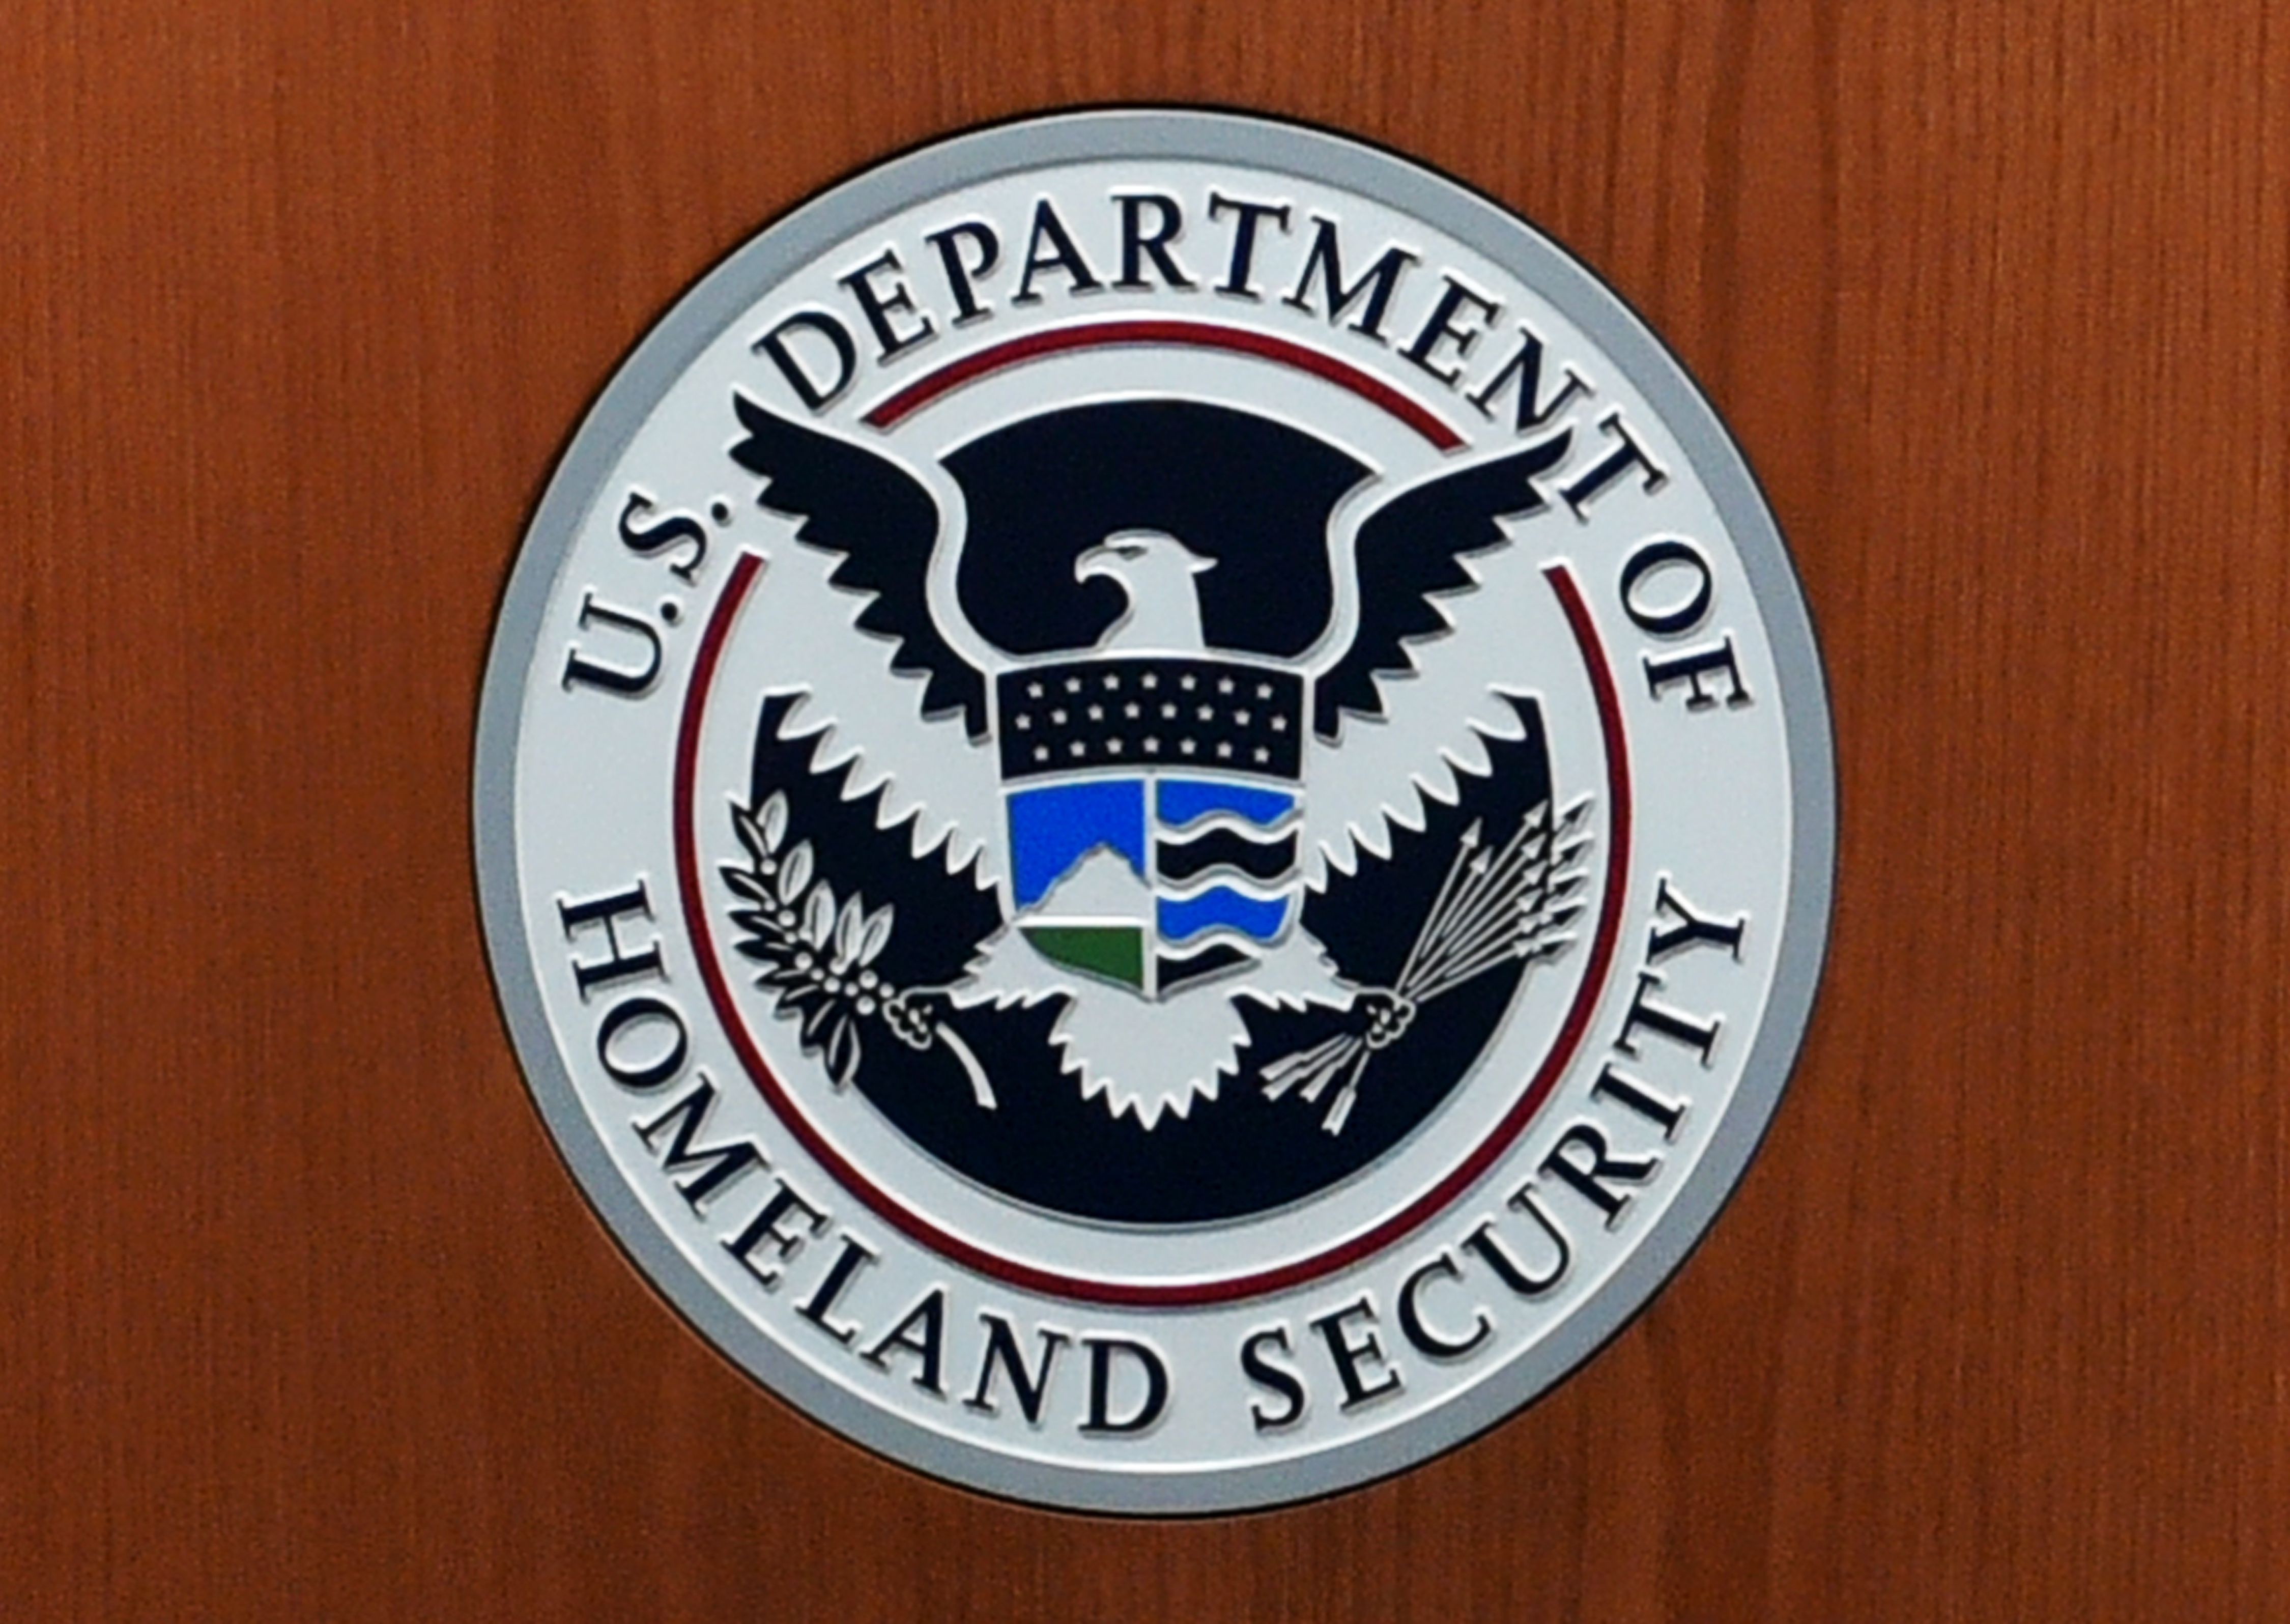 The seal of the U.S. Department of Homeland Security in the U.S. Customs and Border Protection Press Room at the Reagan Building in Washington, D.C., on March 6, 2017. (Mandel Ngan&mdash;AFP/Getty Images)